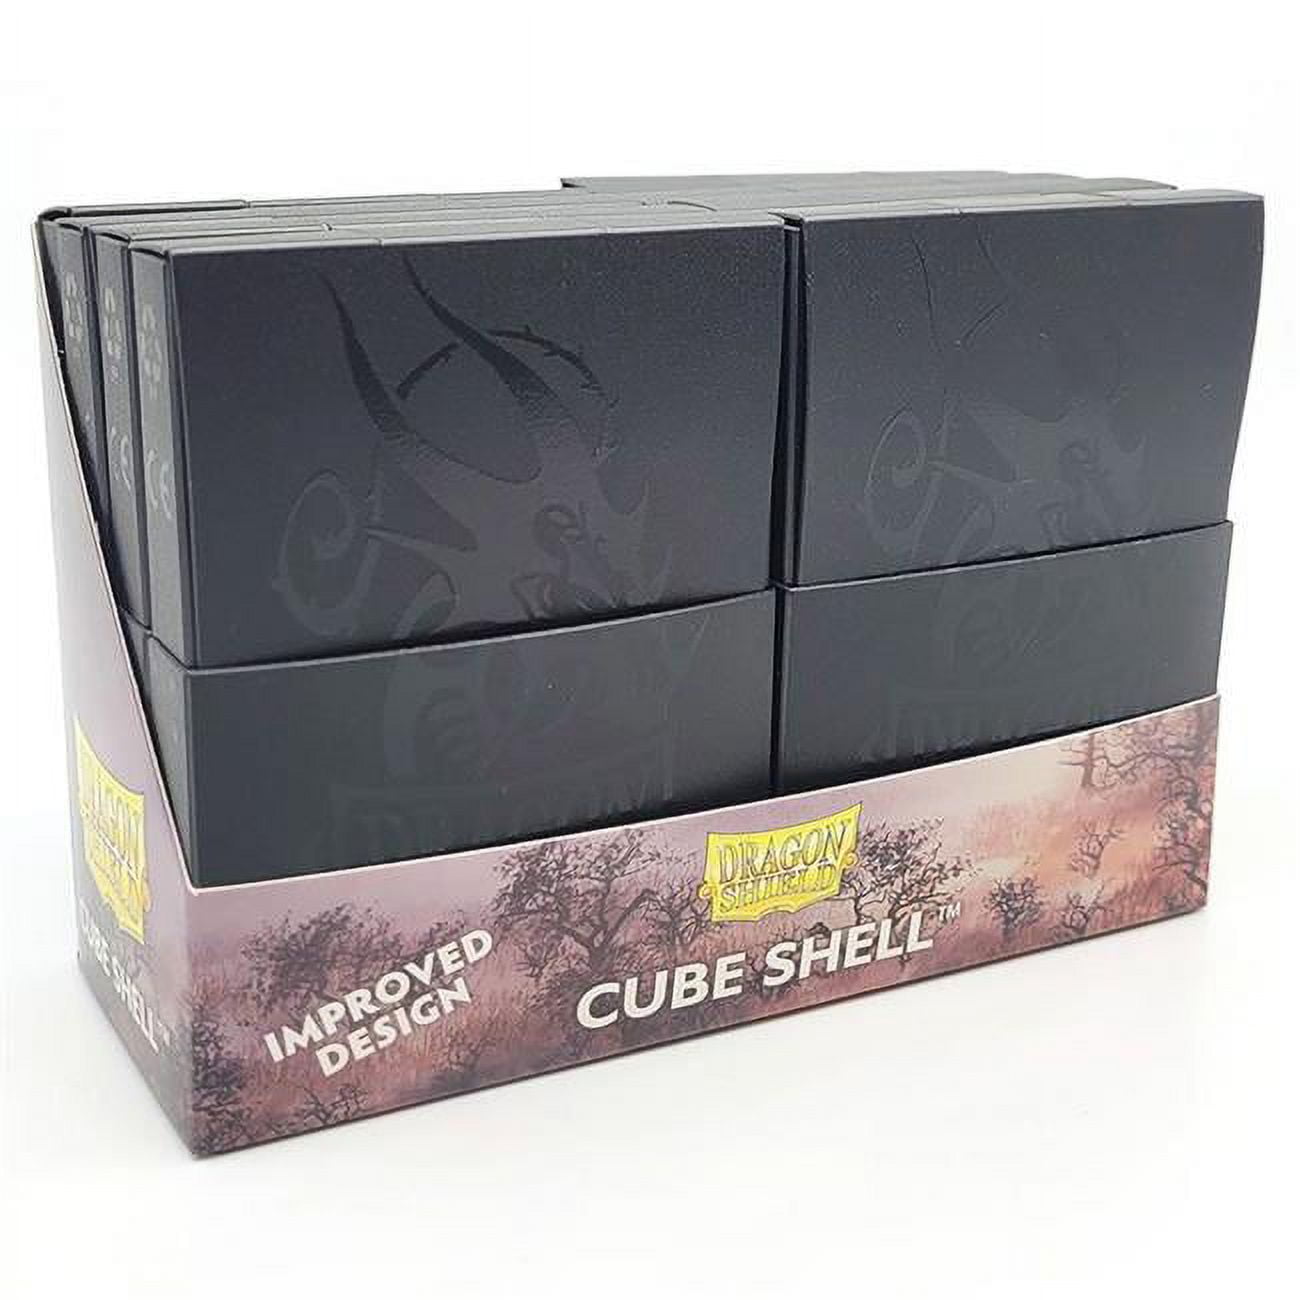 Picture of Arcane Tinmen ATM30524 Cube Shell Card Deck Box, Shadow Black - 8 Piece